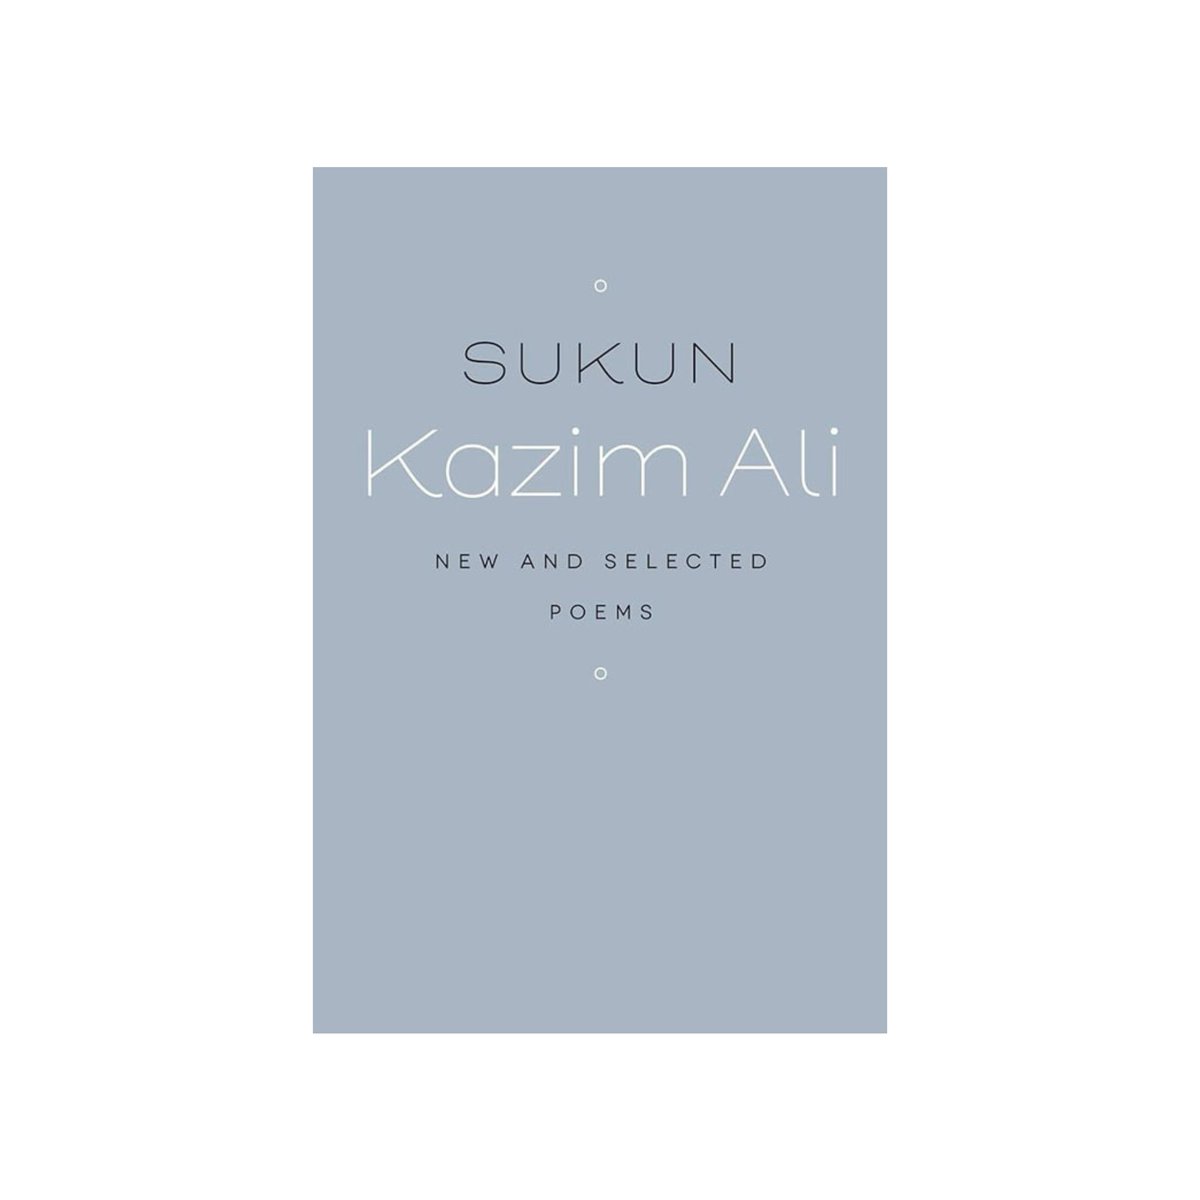 'Ali's singular poetic gifts presented in SUKUN teach poets and readers who desire a future outside the binds of this ongoing hyper colonial world begat by logics of dominion and possession,' writes Rushi Vyas on SUKUN @KazimAliPoet . Read the review here bit.ly/44kfOTX